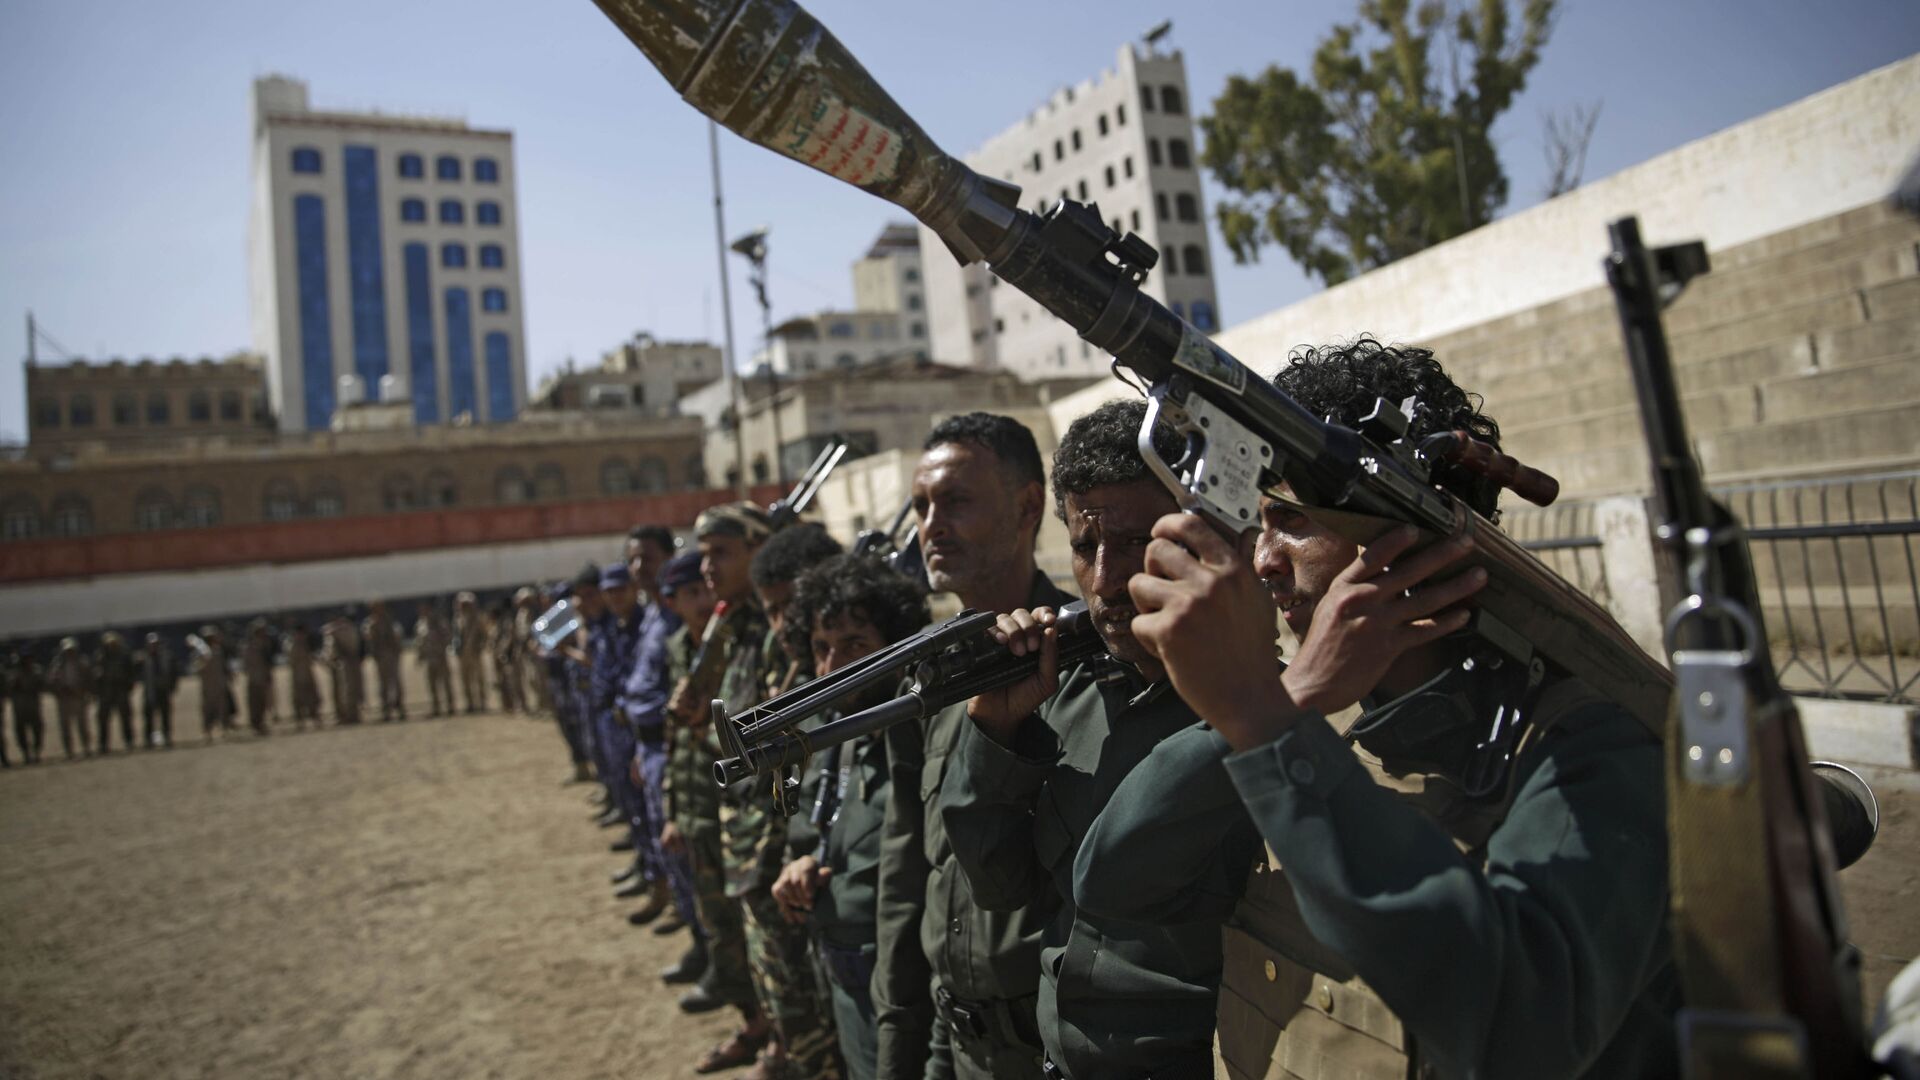 Houthi rebel fighters display their weapons during a gathering aimed at mobilizing more fighters for the Iranian-backed Houthi movement, in Sanaa, Yemen, Thursday, Feb. 20, 2020. The Houthi rebels control the capital, Sanaa, and much of the country’s north, where most of the population lives. They are at war with a U.S.-backed, Saudi-led coalition fighting on behalf of the internationally recognized government. - Sputnik International, 1920, 24.07.2021